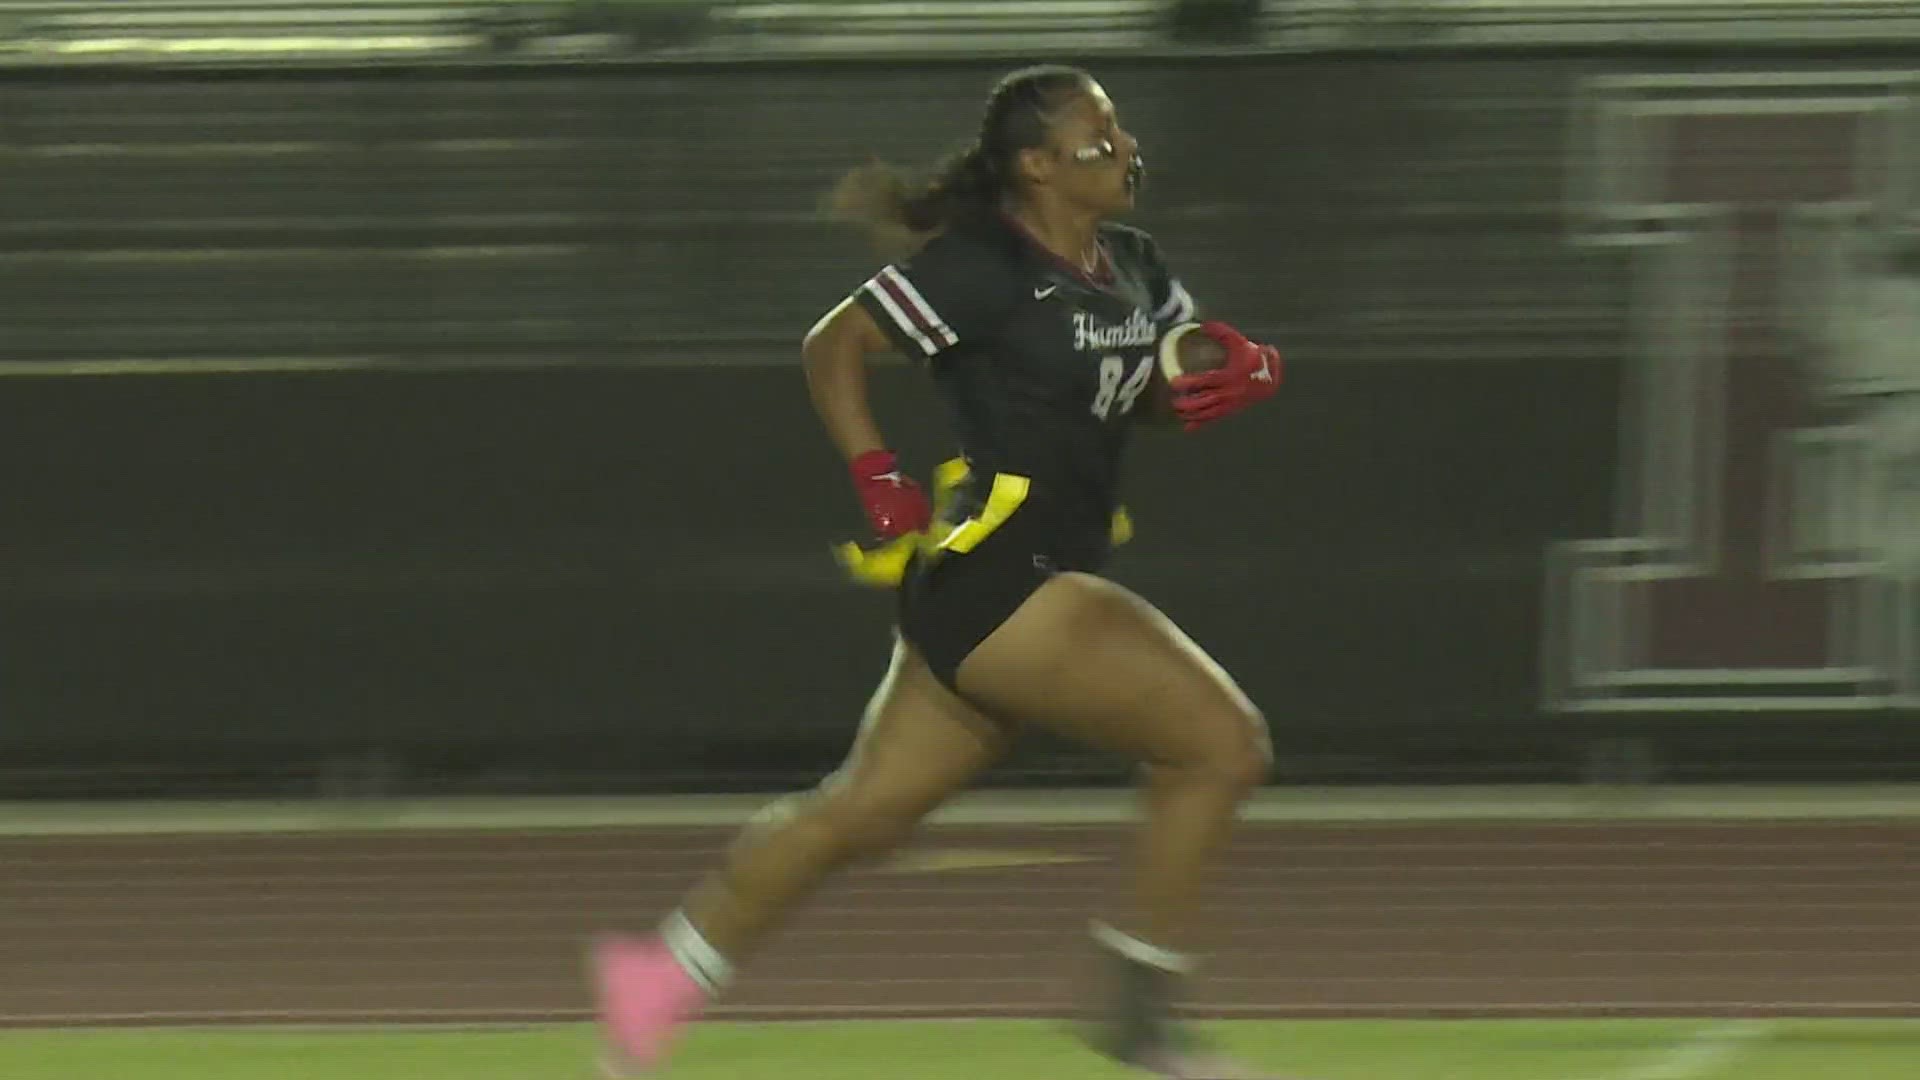 The 1st-ever girls flag football playoffs are underway and Hamilton secured a semifinal spot in 6A with a 17-13 win over Desert Ridge